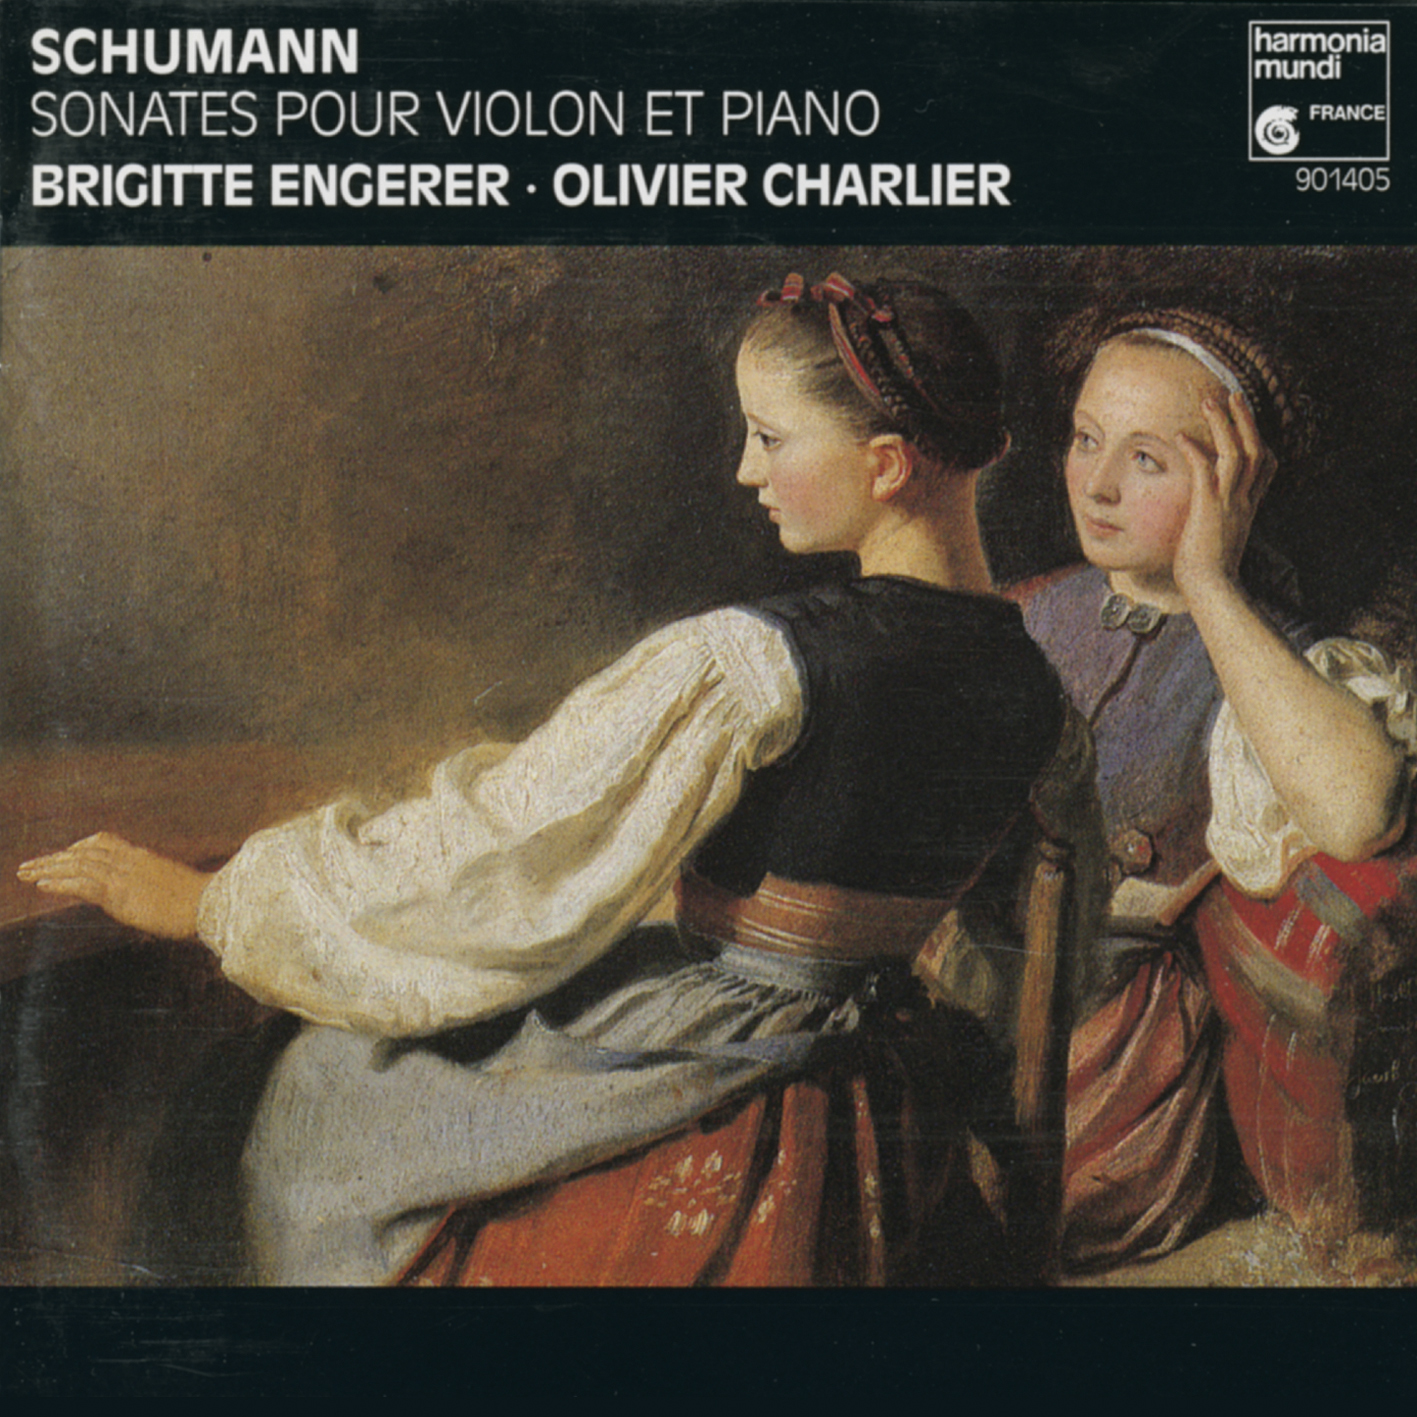 Three Romances for violin and piano, Op. 94: I. Nicht schnell